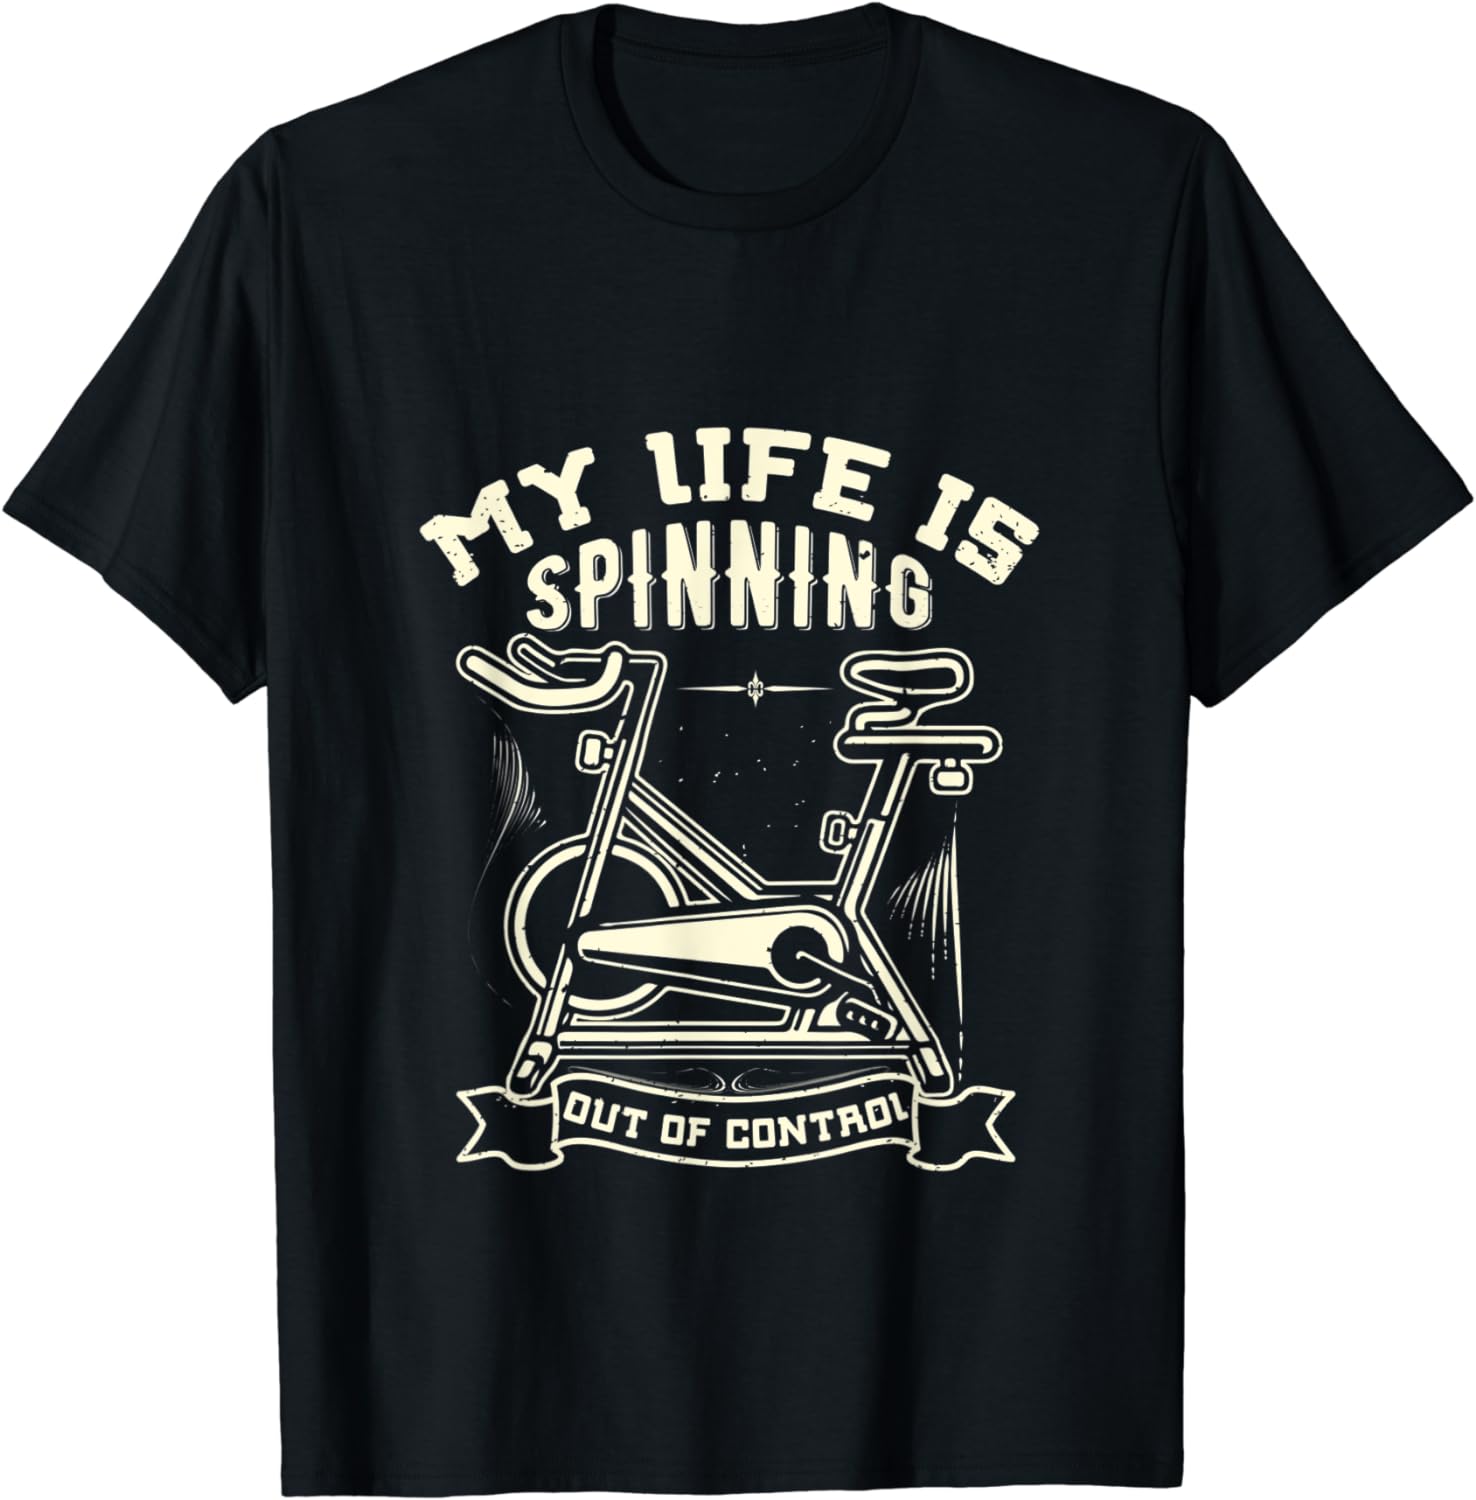 My Life Is Spinning Out Of Control T-Shirt